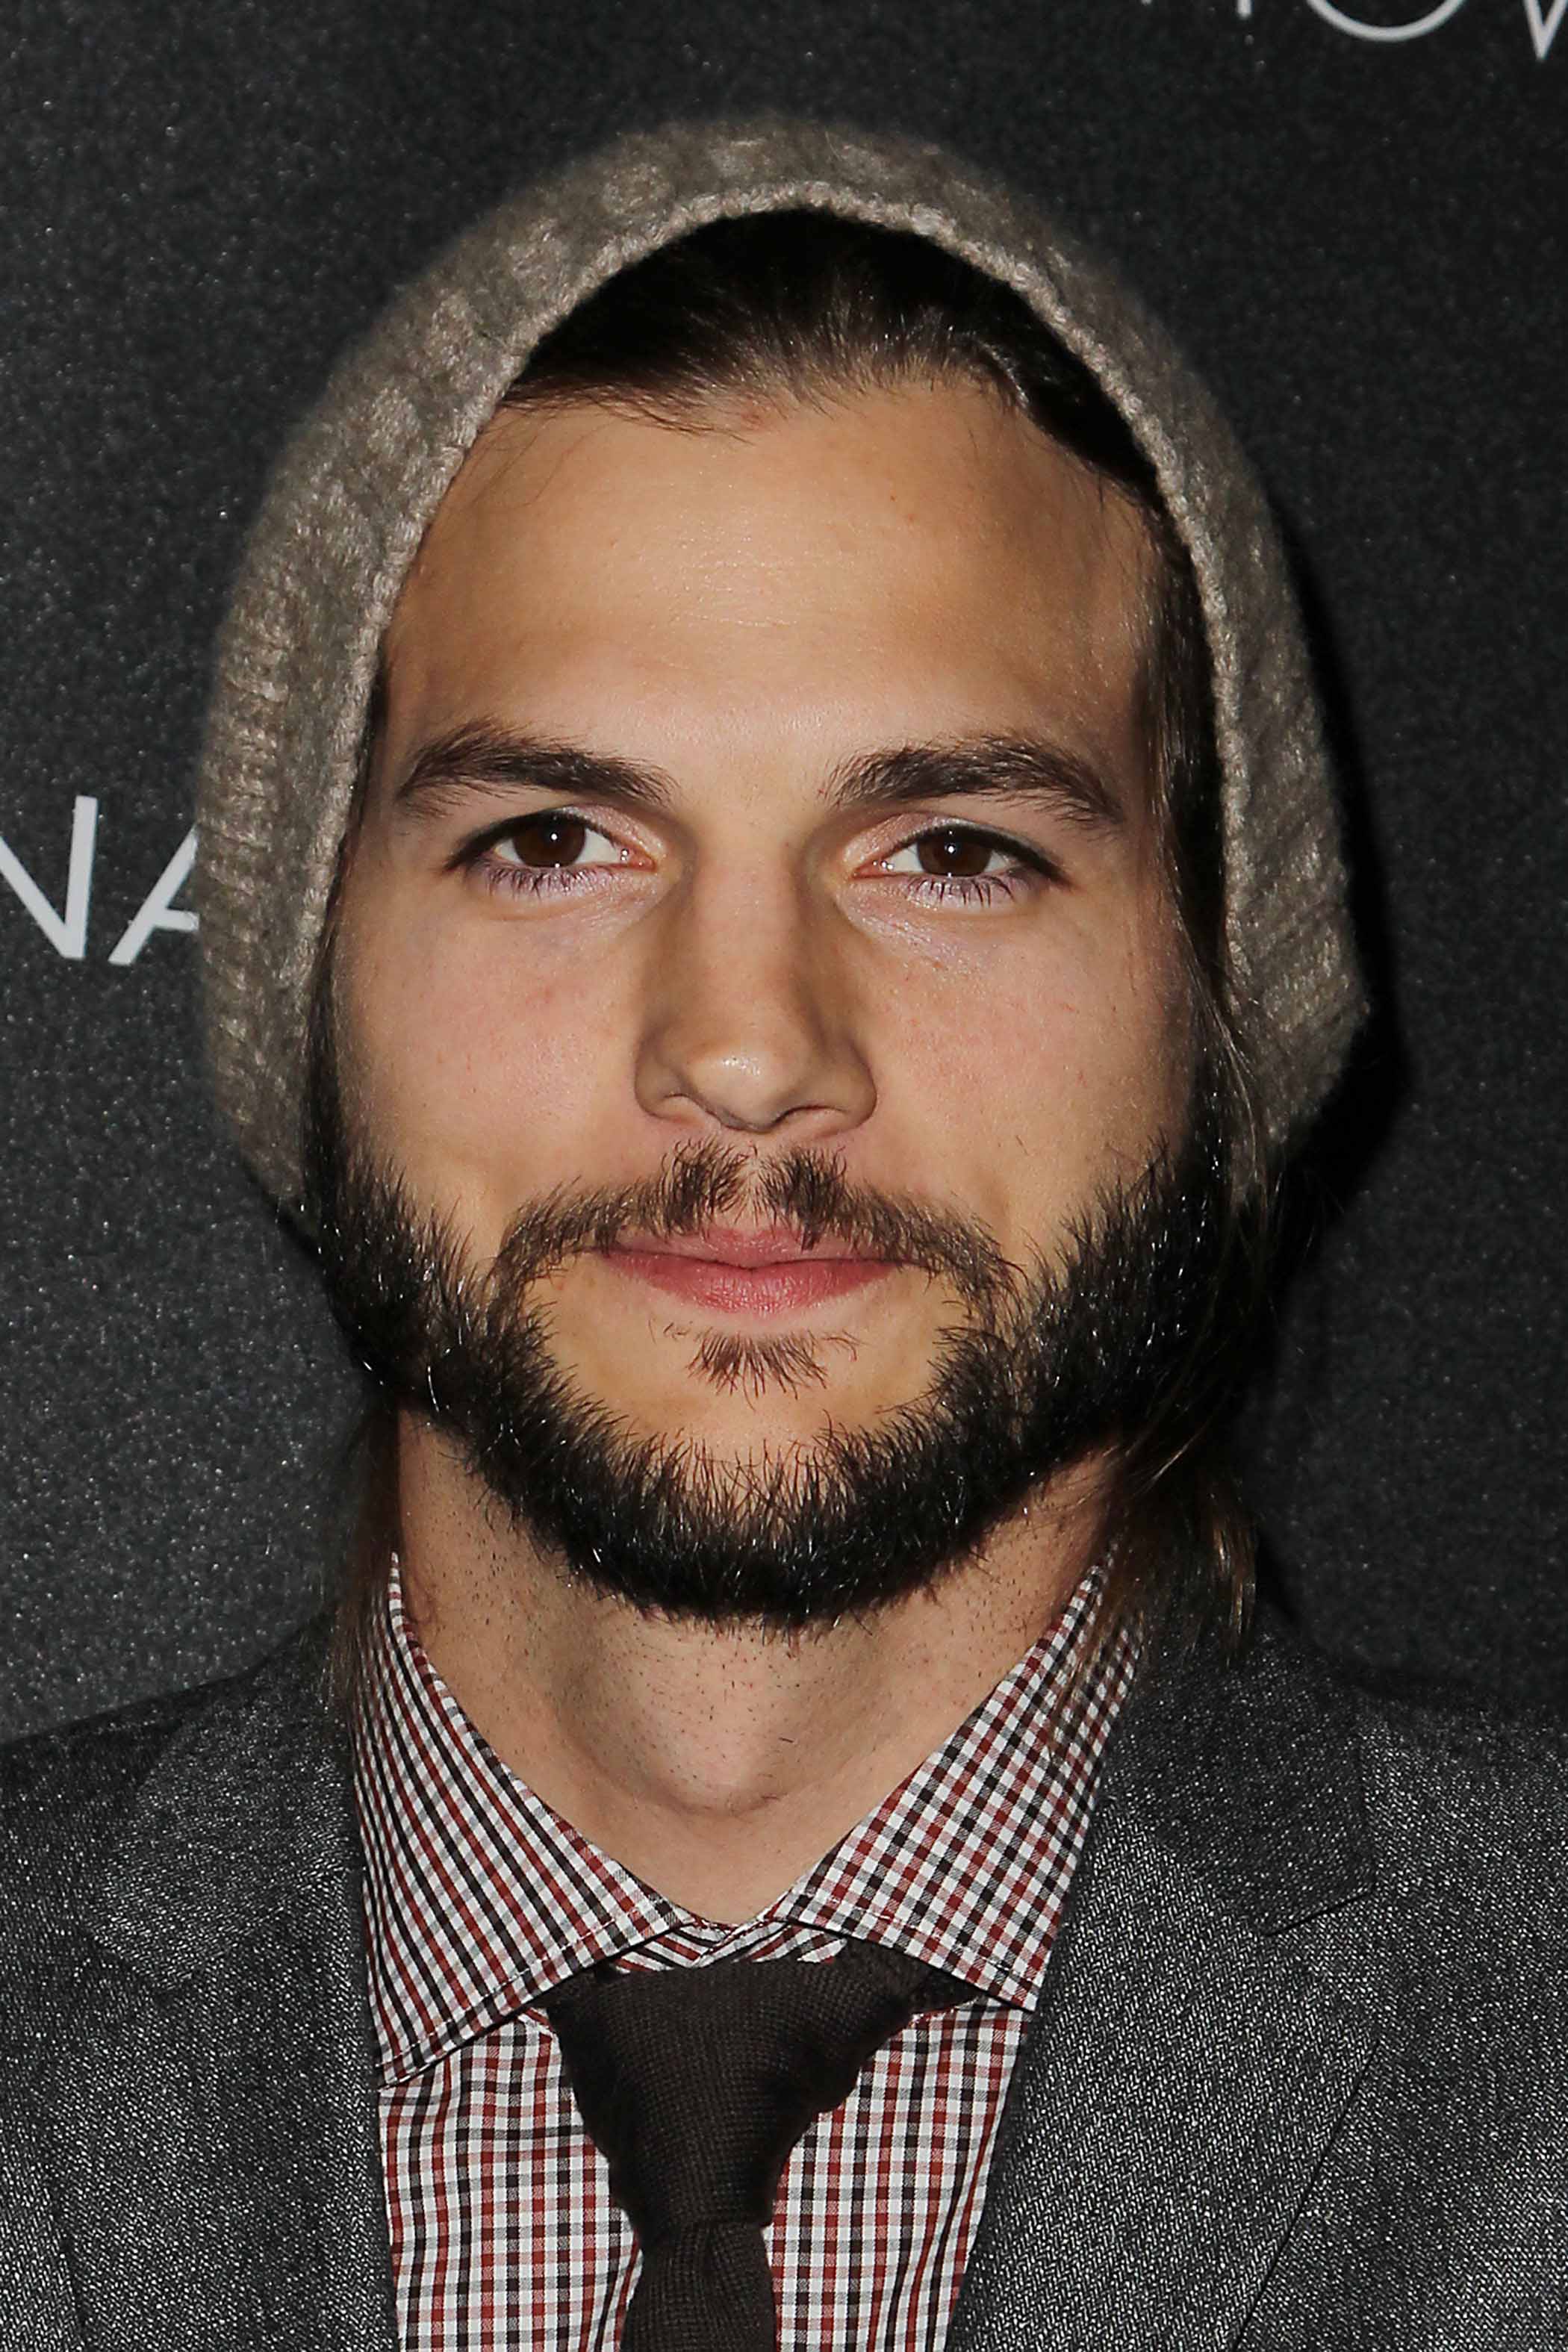 Ashton Kutcher on the red carpet wearing a grey suit and tie with a beanie hat on and neat facial hair